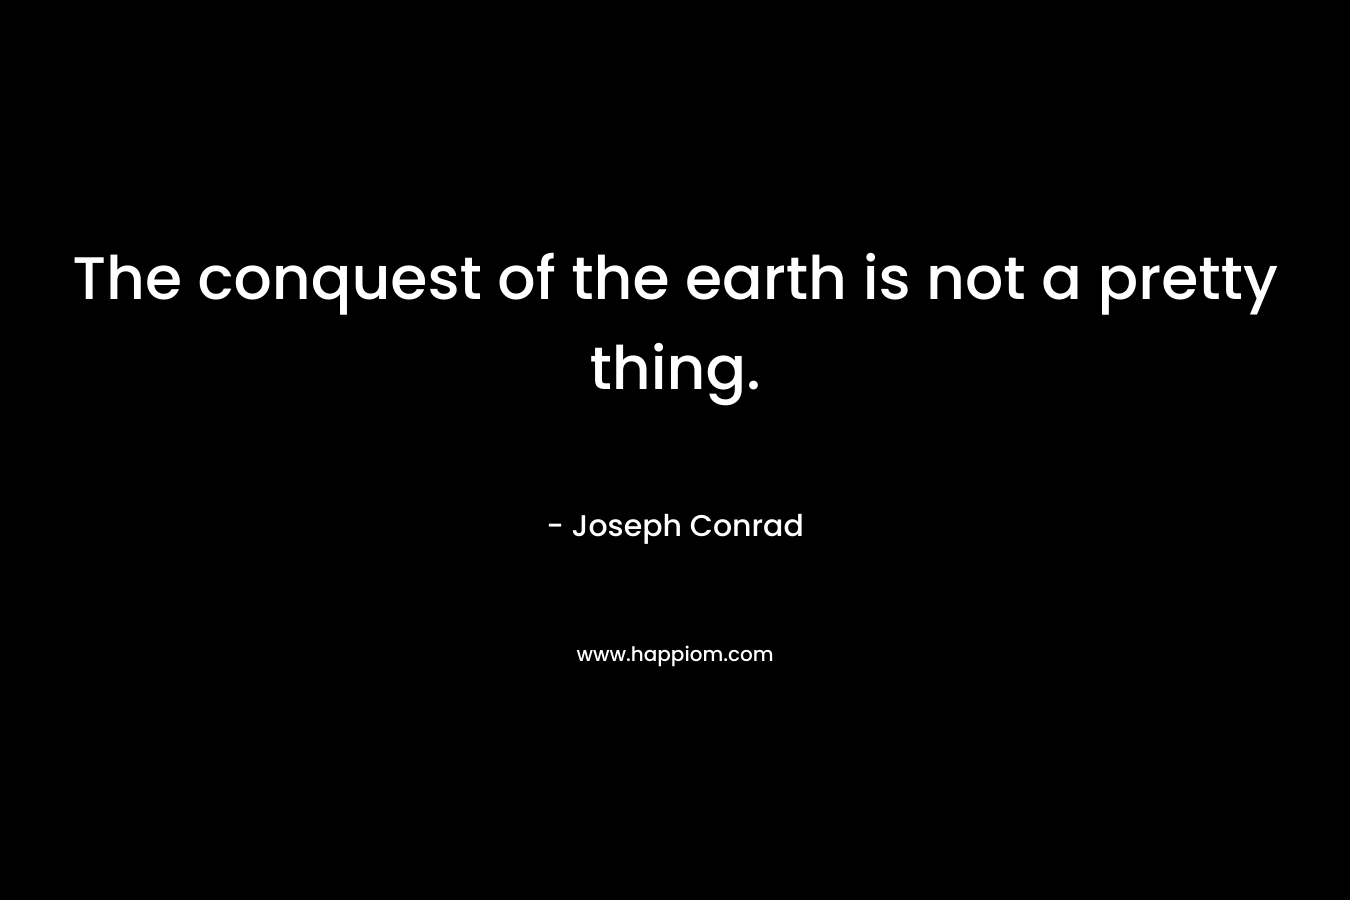 The conquest of the earth is not a pretty thing.